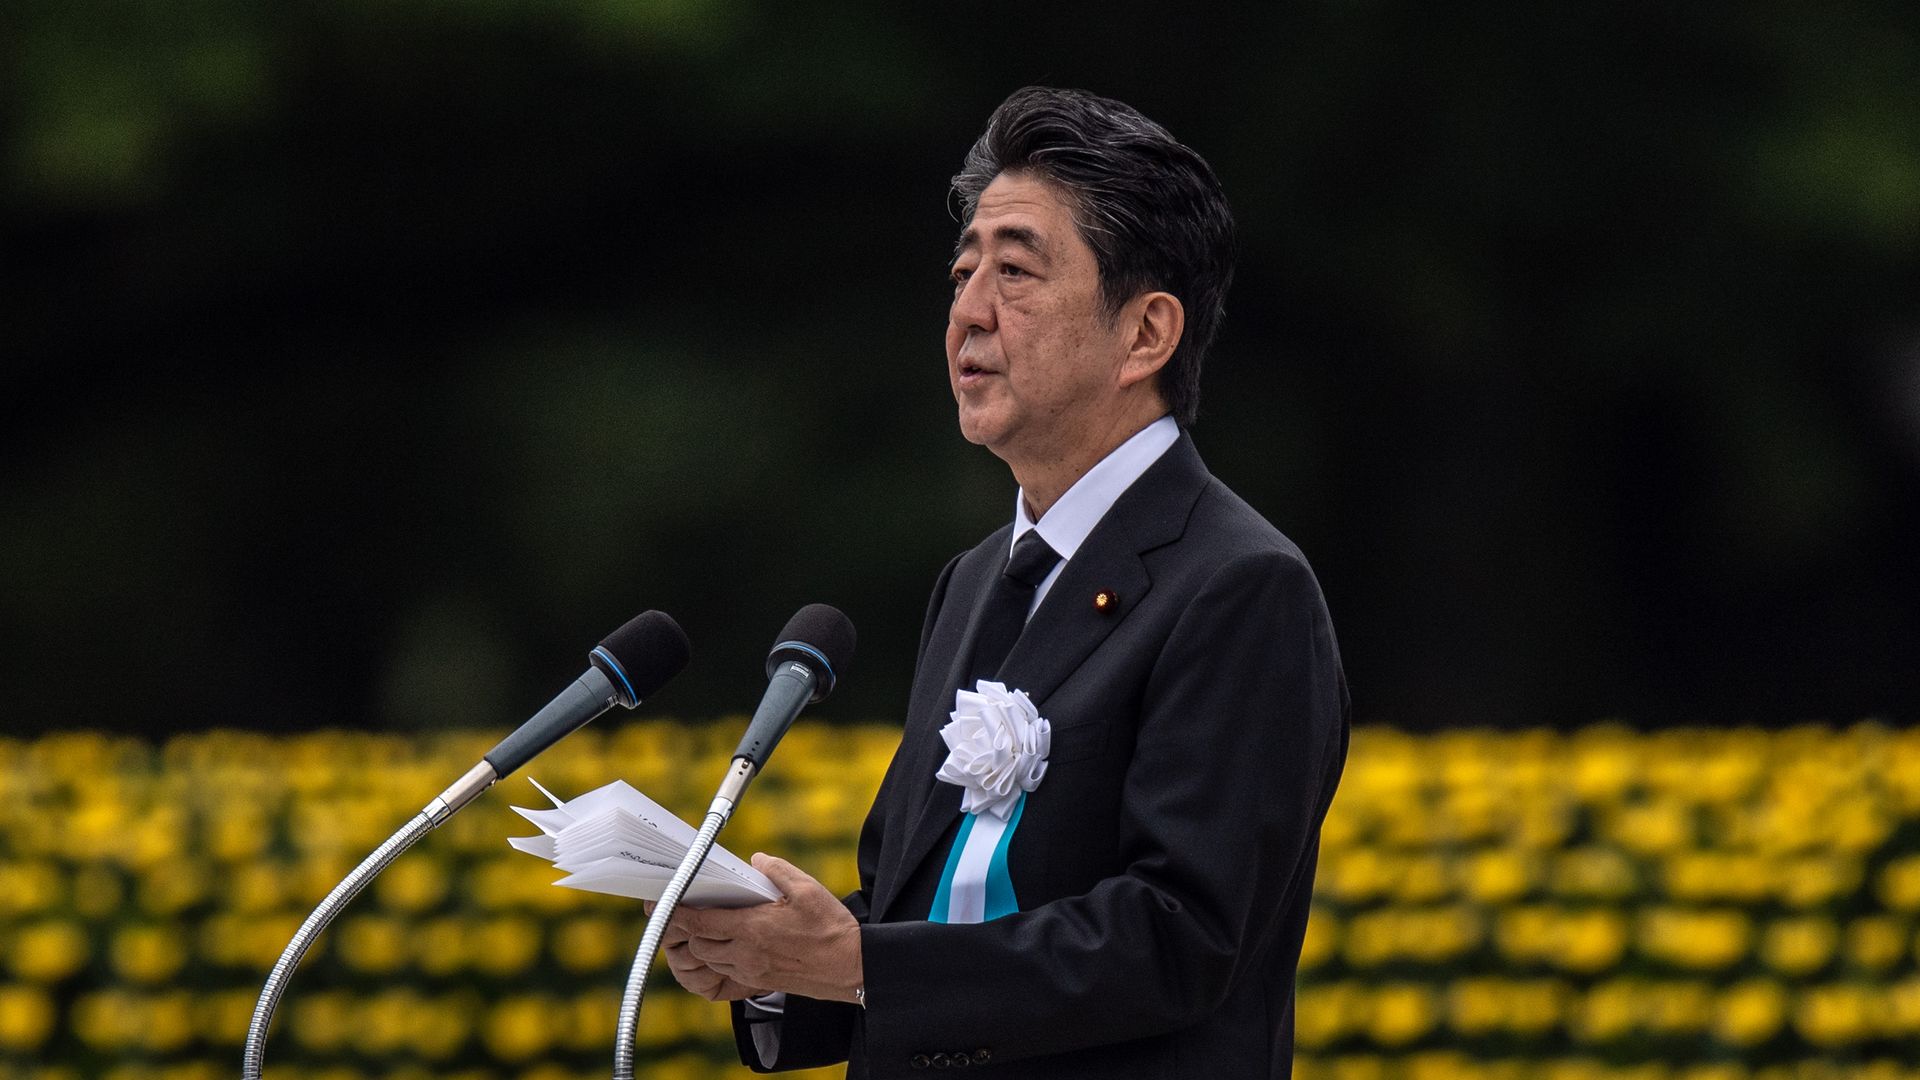 Japanese Prime Minister, Shinzo Abe, makes a speech during the 75th anniversary of the Hiroshima atomic bombing, on August 6, 2020 in Hiroshima, Japan.